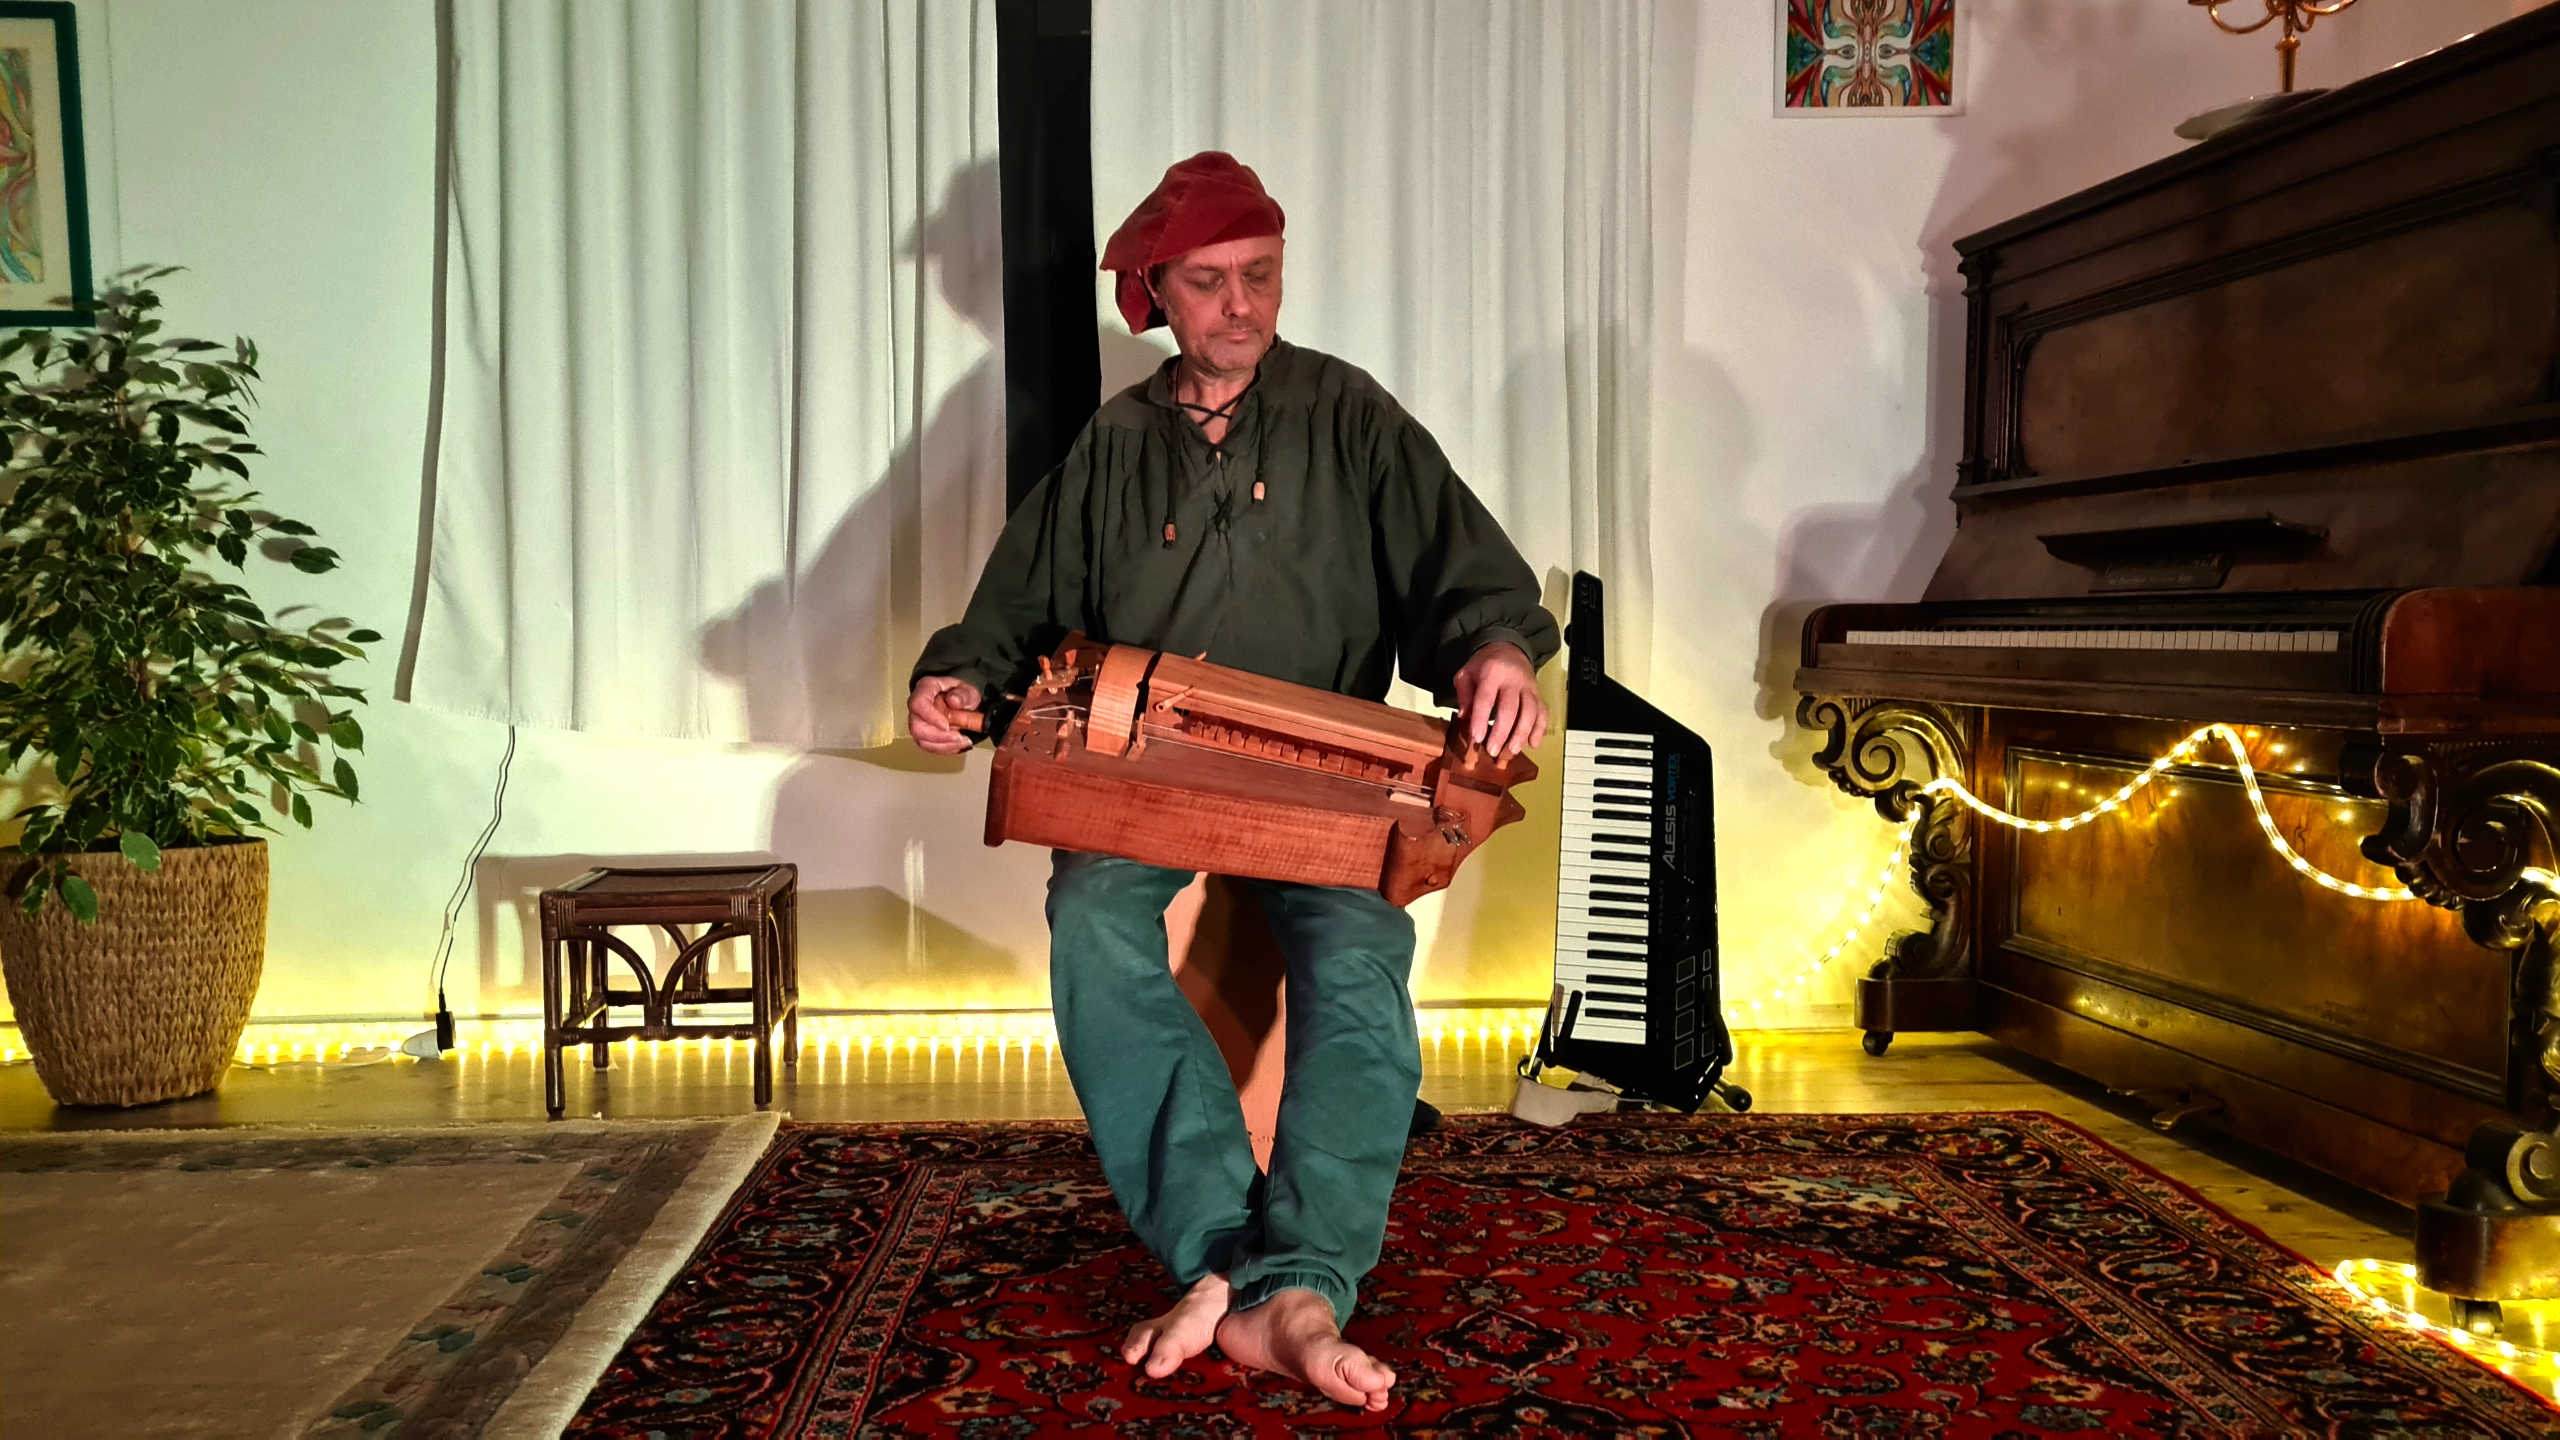 Ioannes Peregrinus and his hurdy gurdy